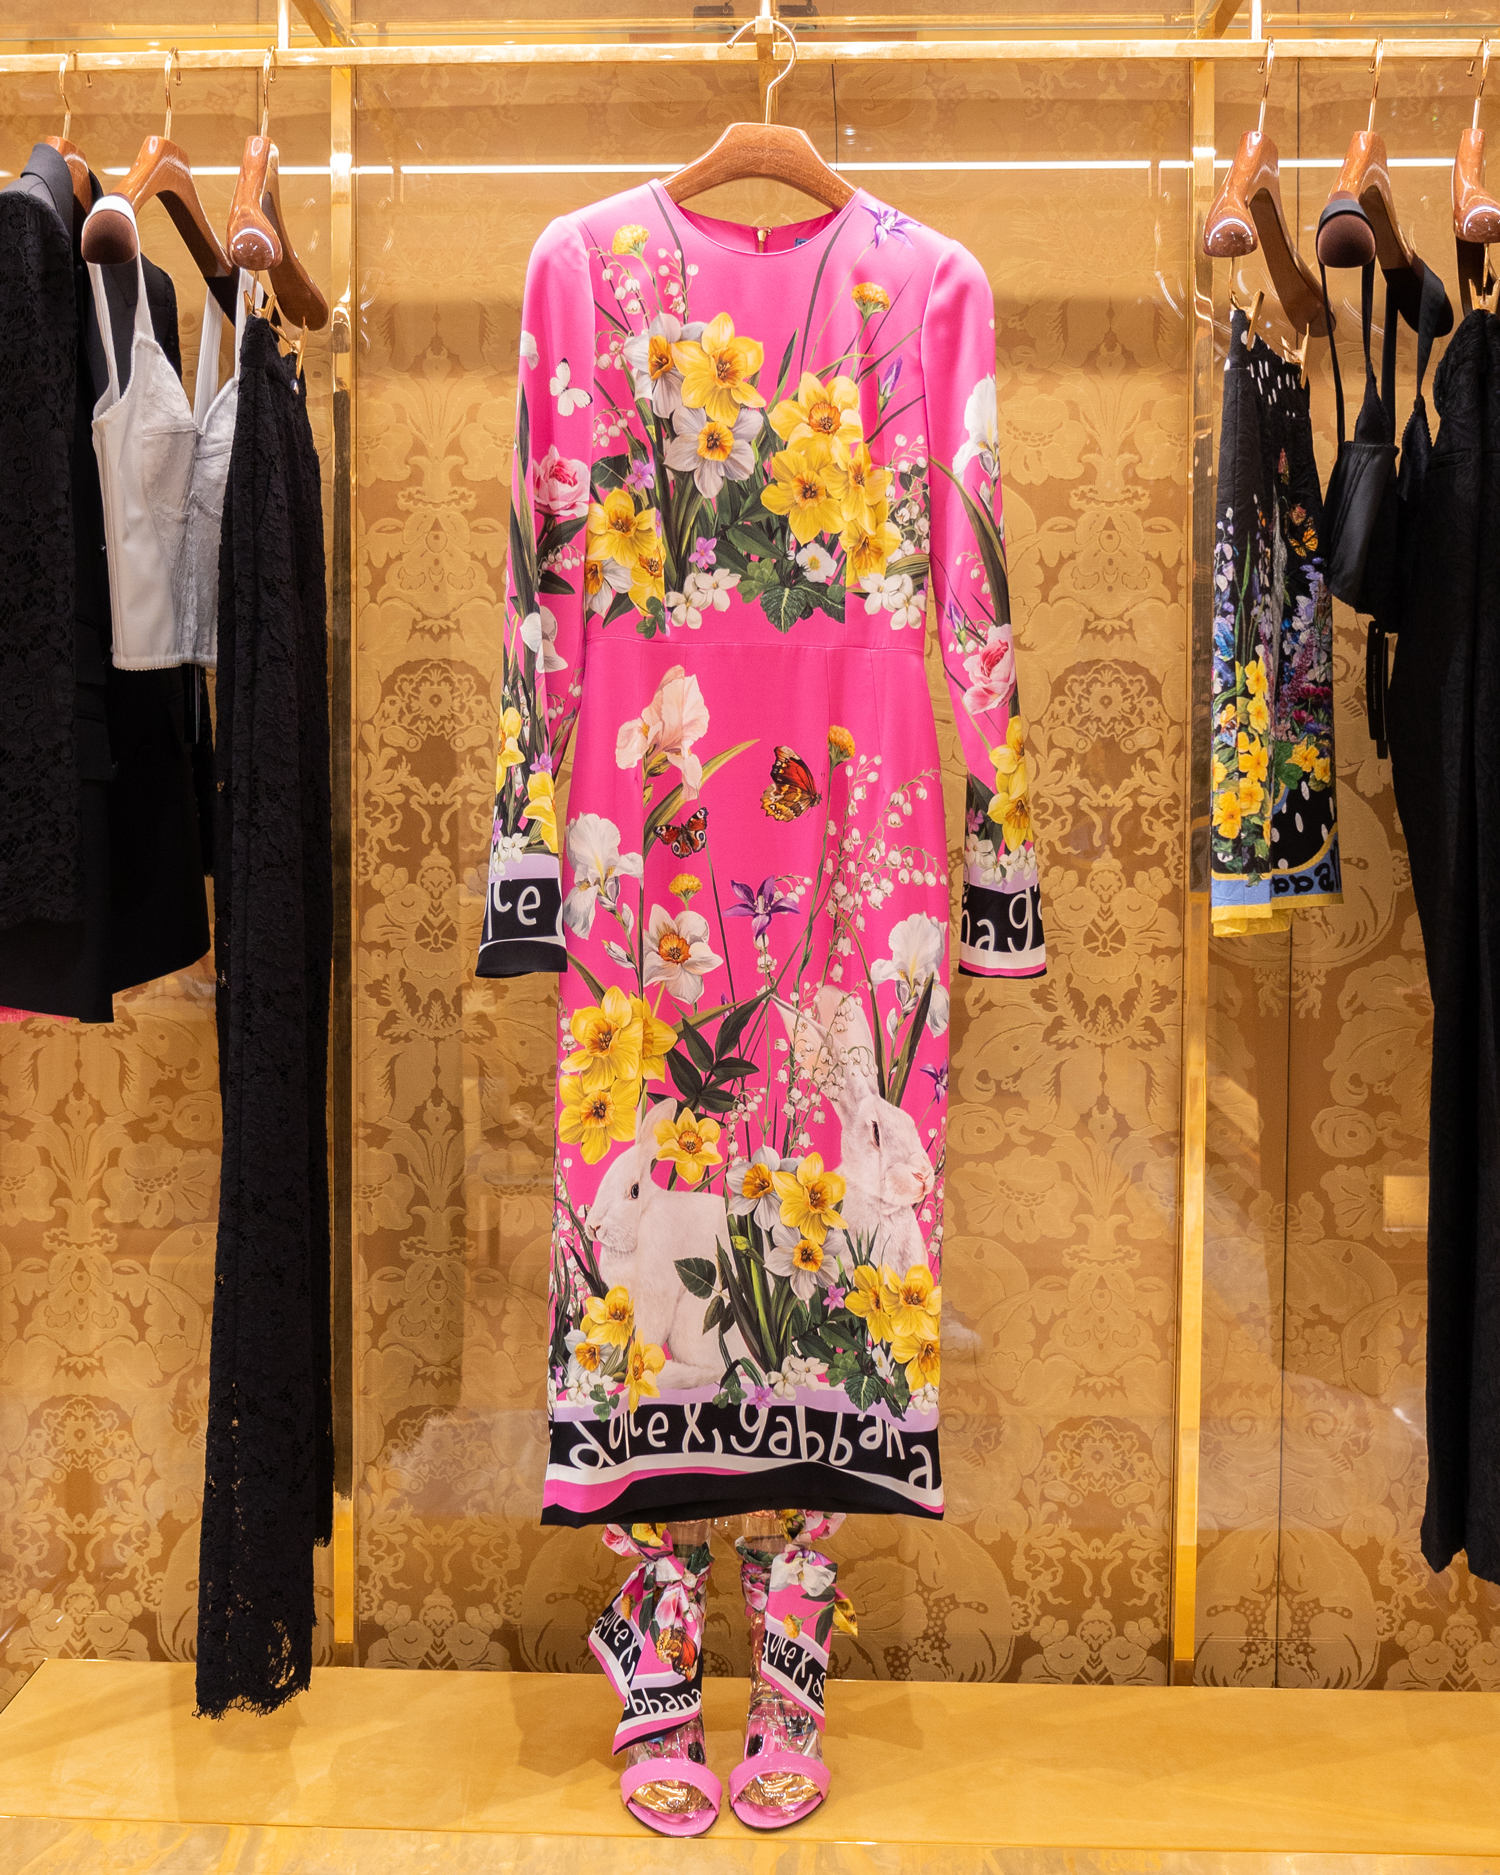 Lunar New Year 2023: Festive looks from Tory Burch, Vans and Coach